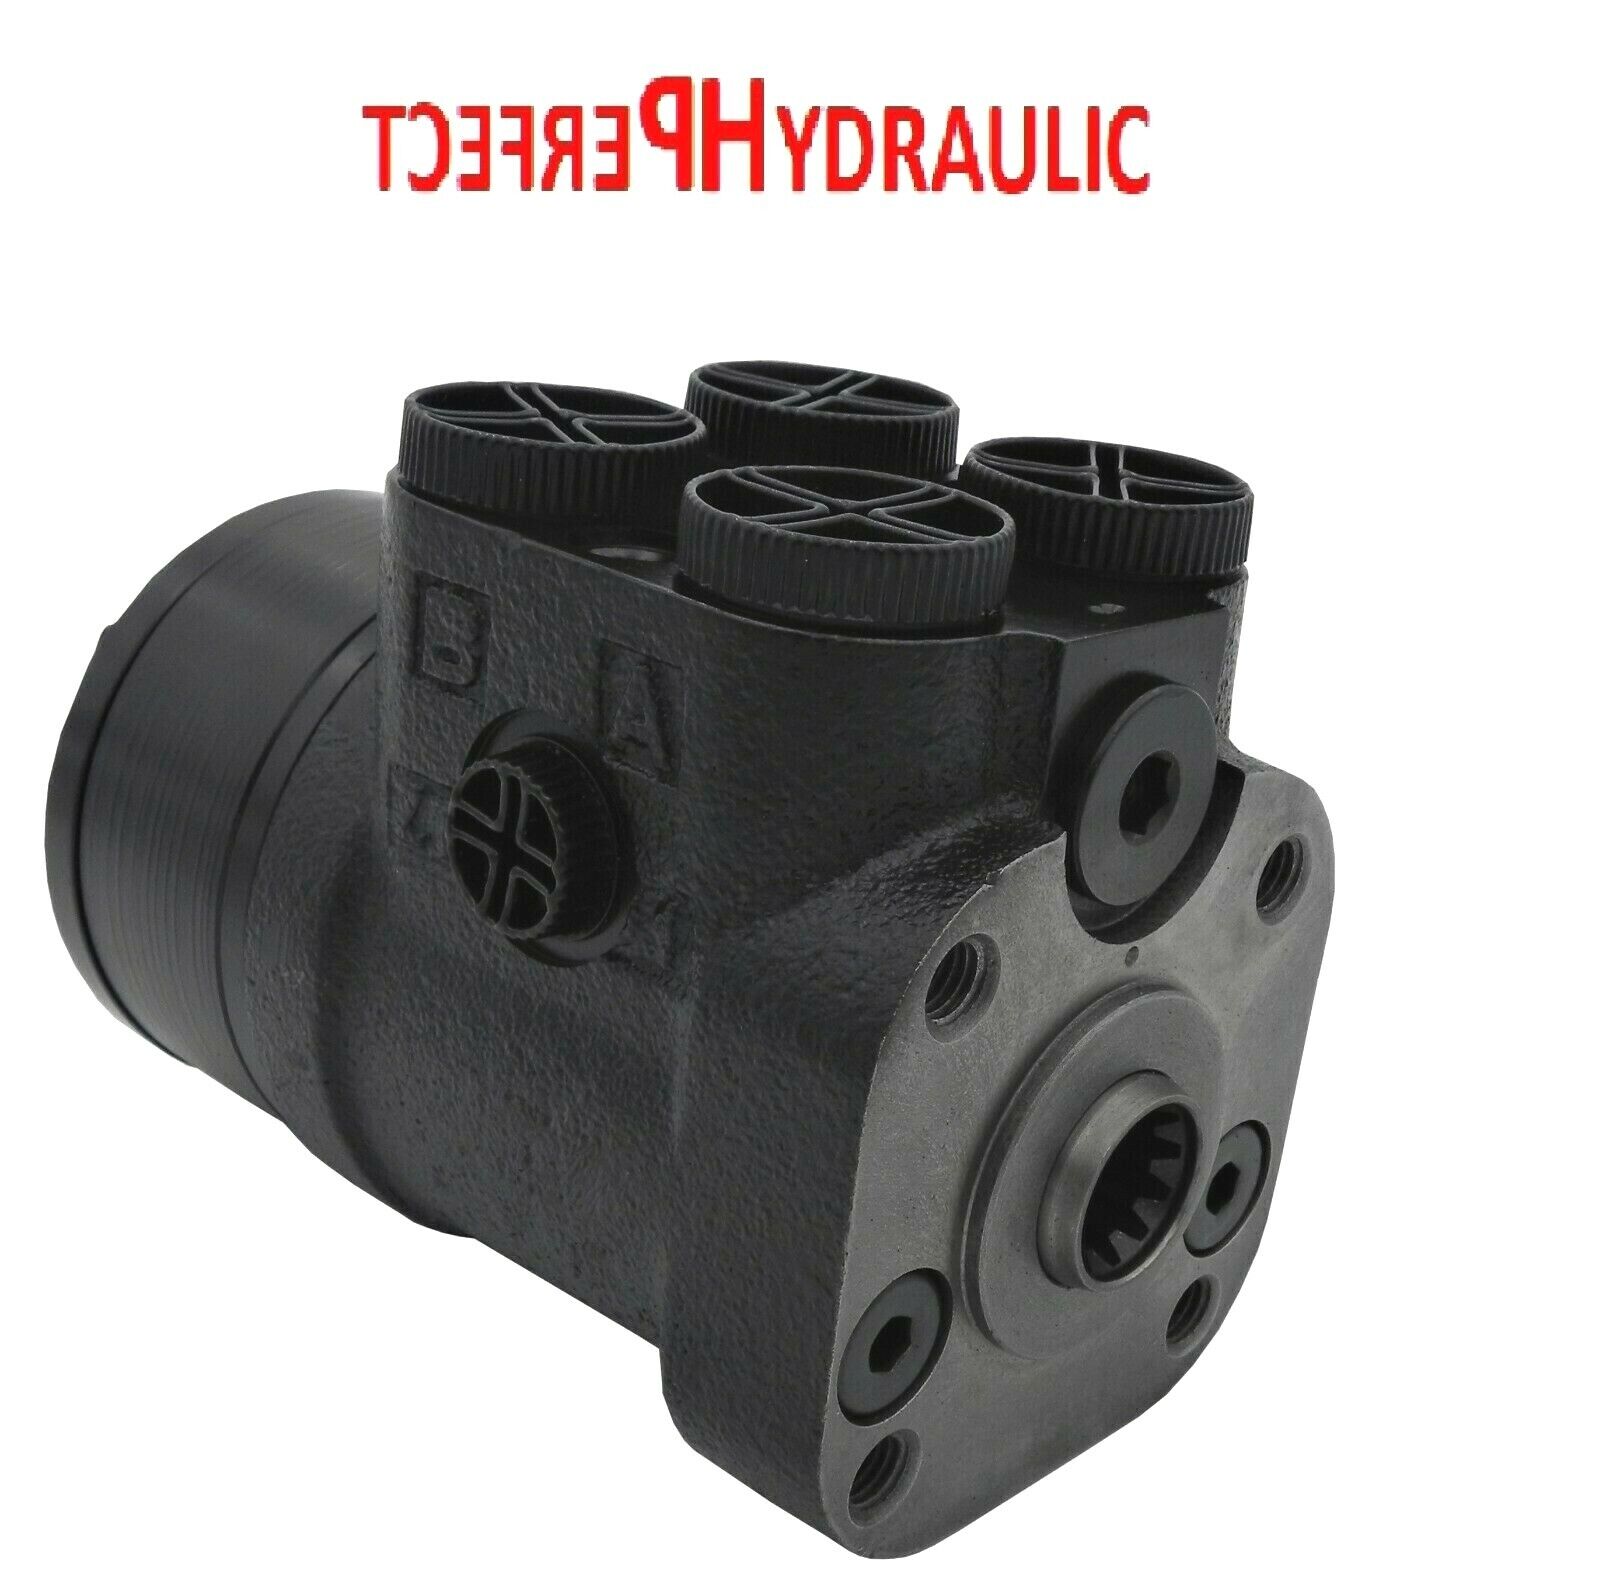 OSPB steering units from 200 to 499 cc/rev